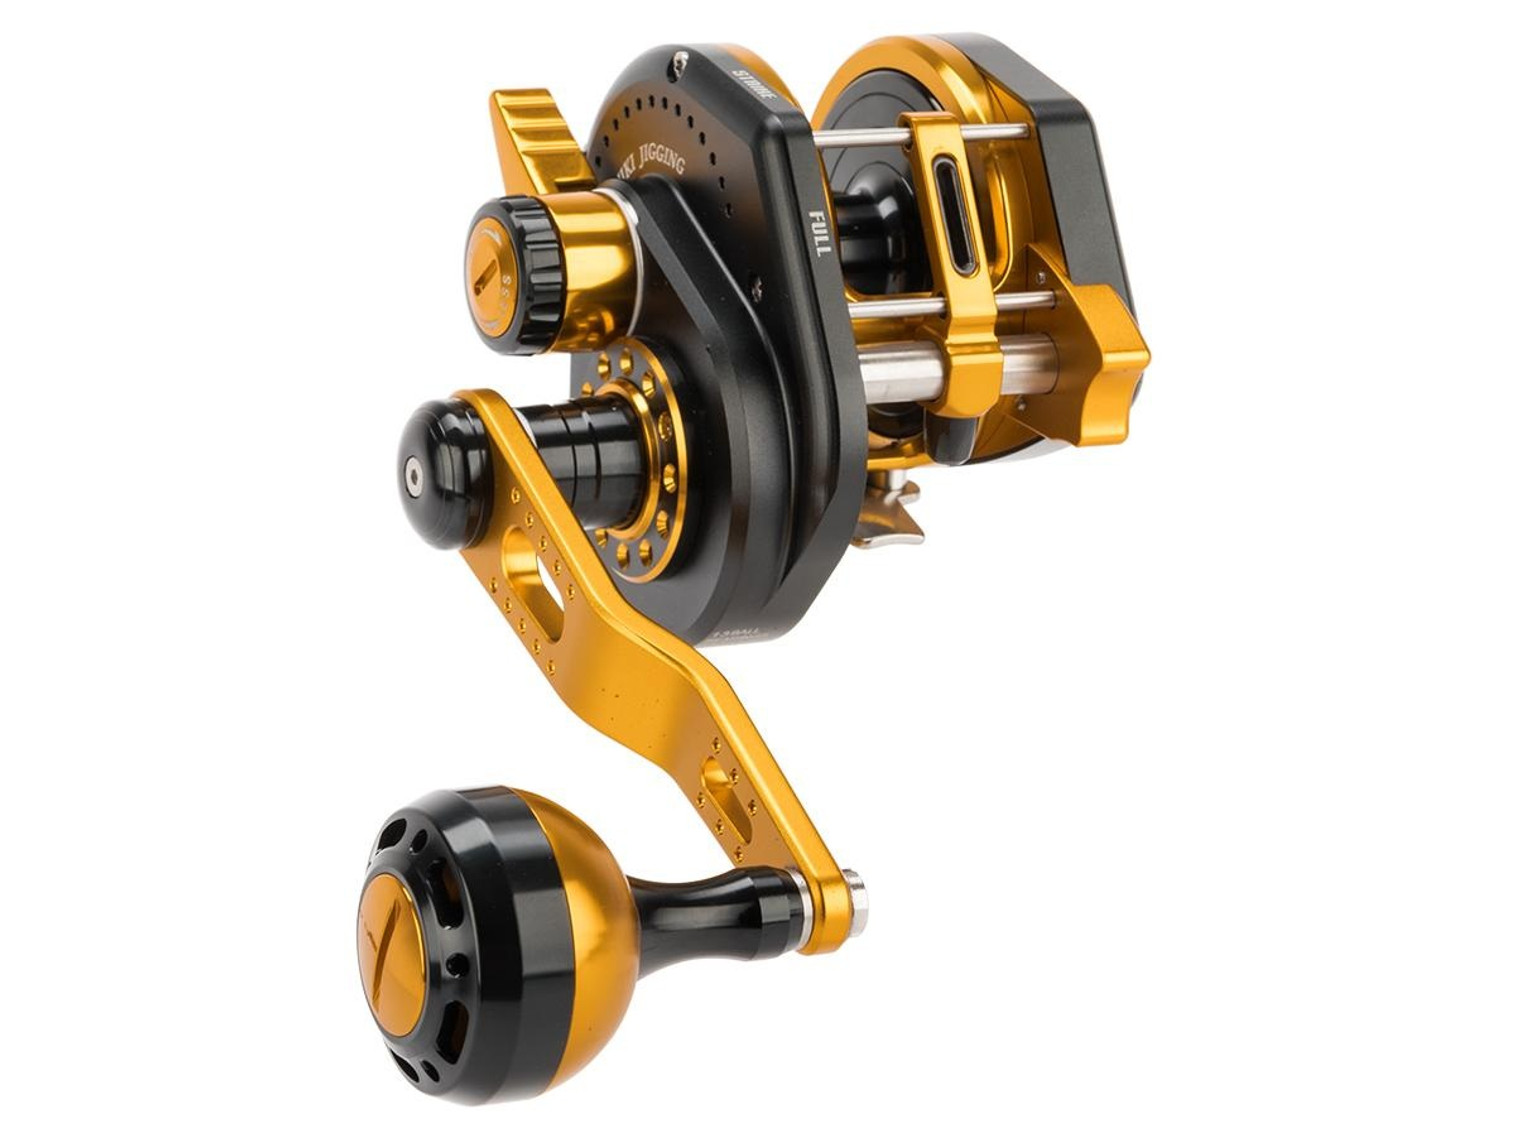 Jigging Master Wiki Violent Slow Lever Wind Fishing Reel w/ Automatic Line Guide - 2000XH Left Black